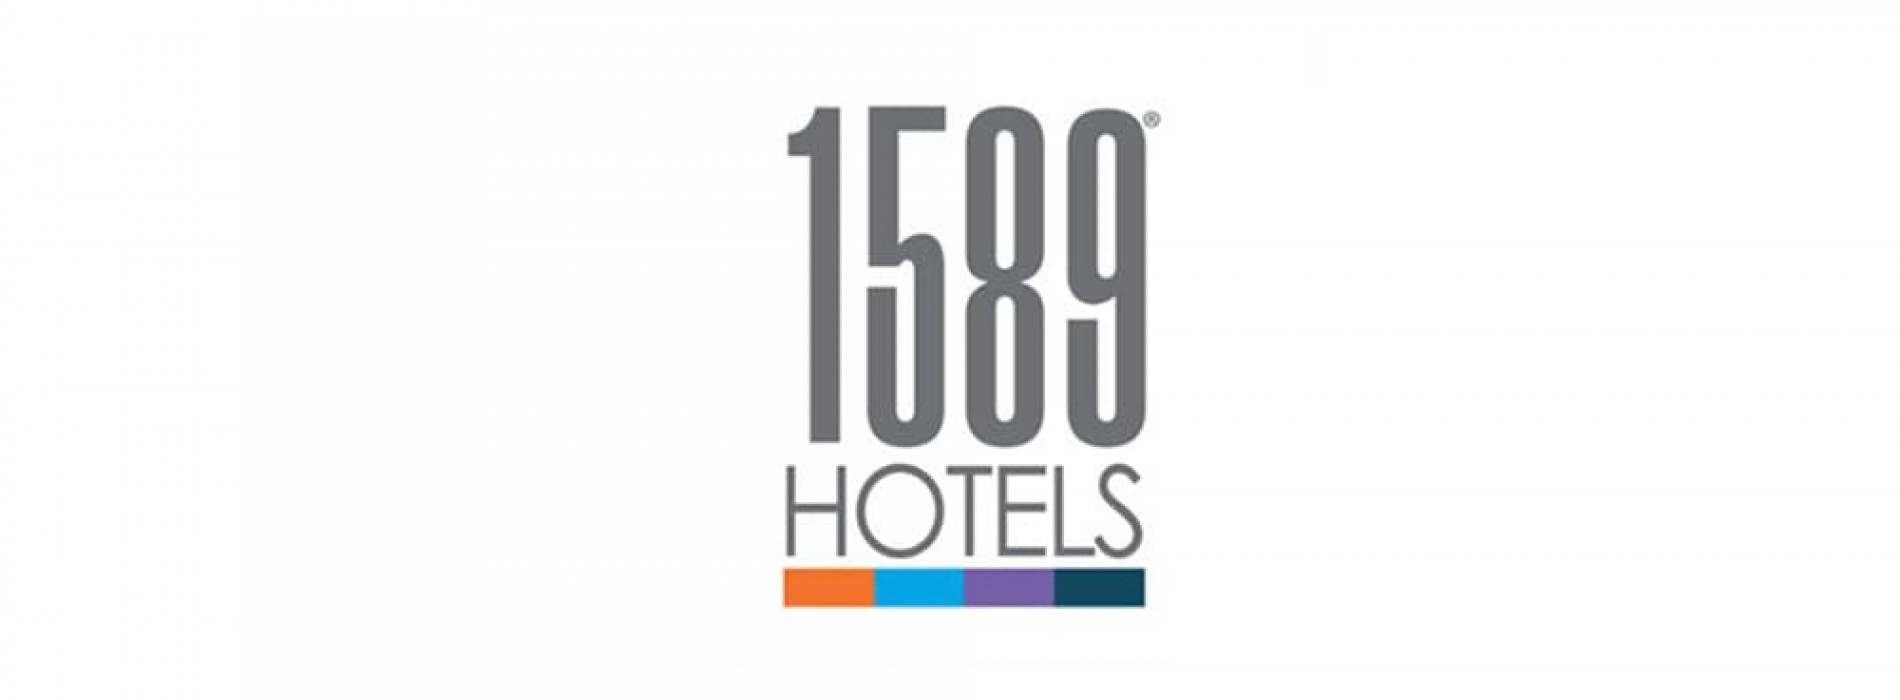 1589 Hotels added 16 properties to its portfolio from April 2017 to March 2018